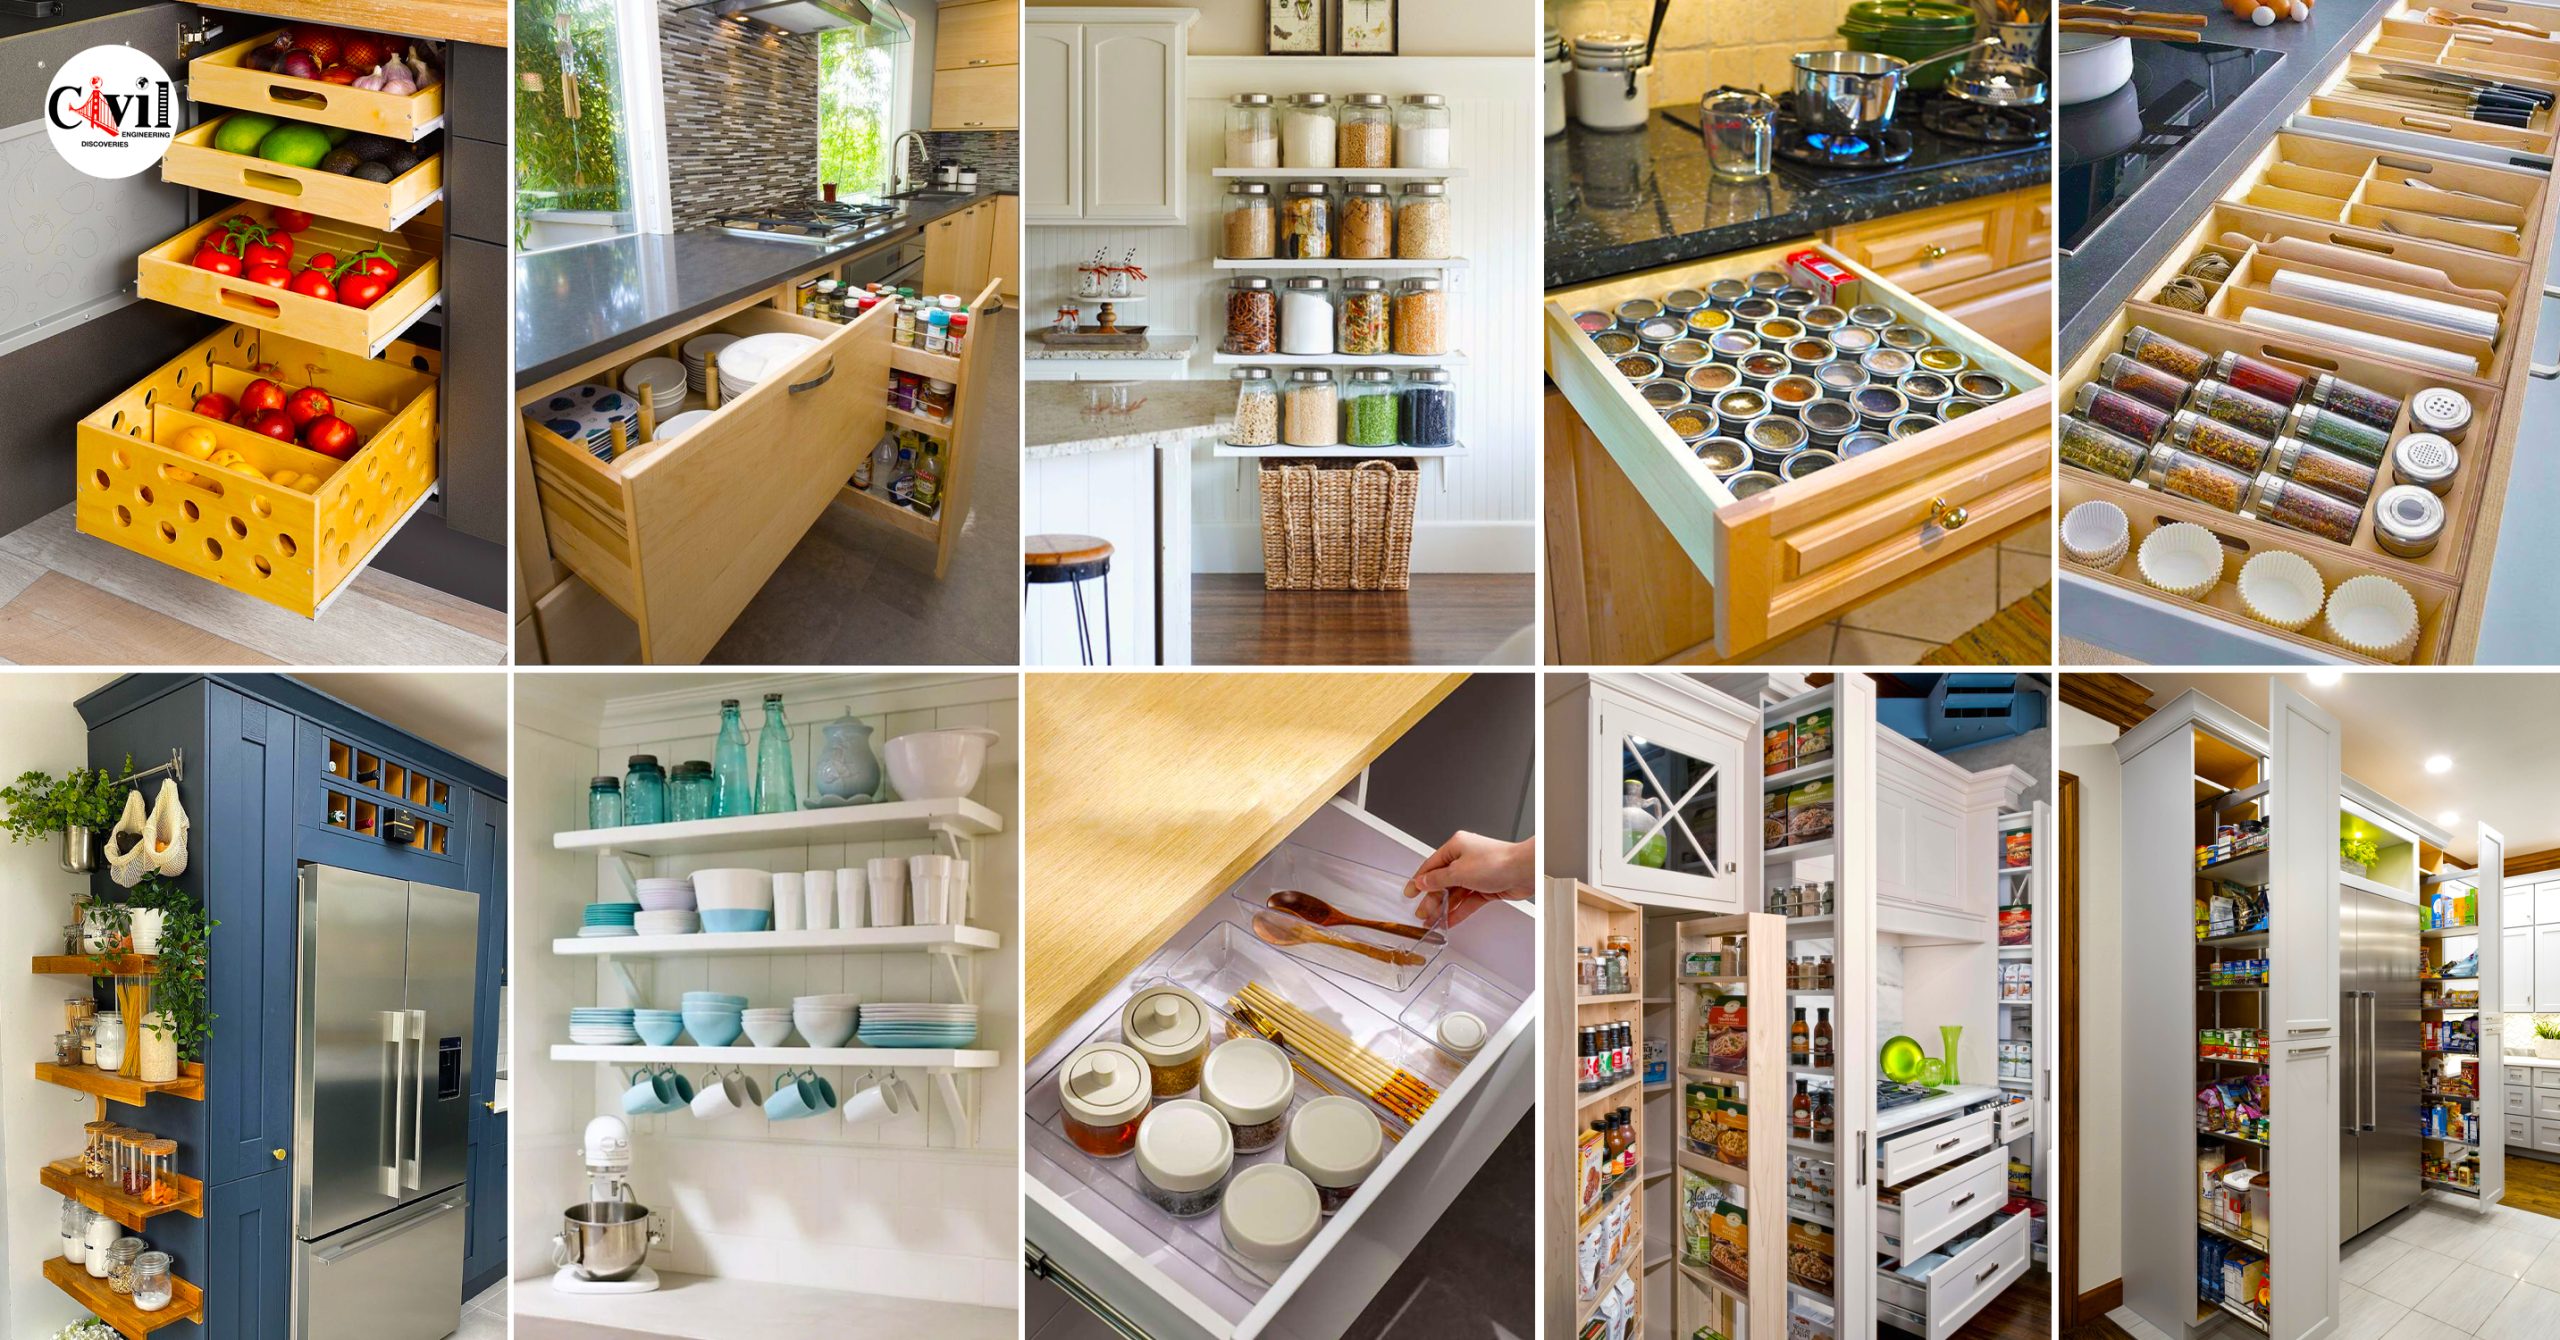 https://engineeringdiscoveries.com/wp-content/uploads/2023/09/Maximize-Your-Space-Brilliant-Kitchen-Organization-Ideas-For-Effortless-Cabinet-Storage-scaled.jpg